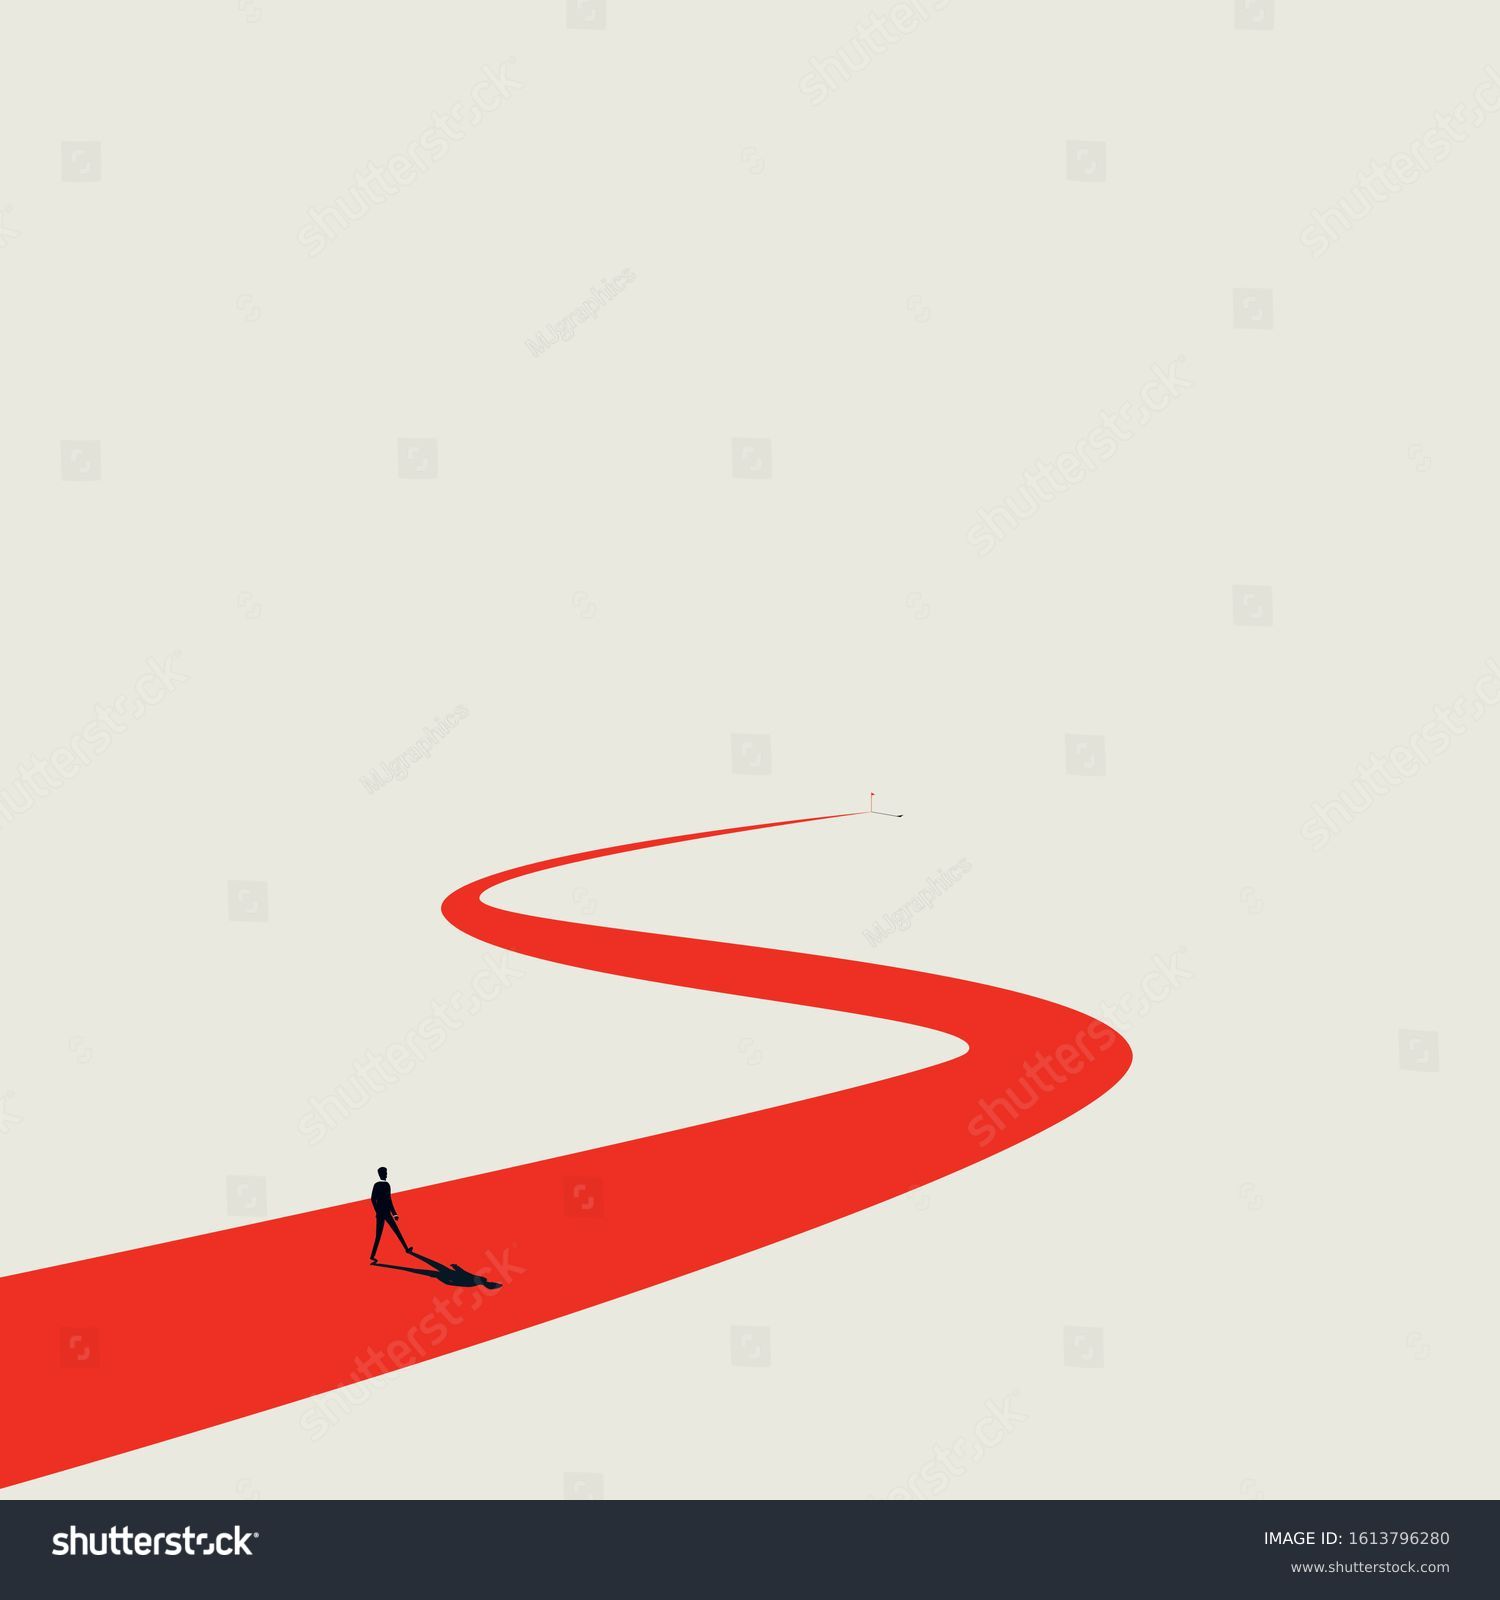 SVG of Business goal or objective vector concept with businessman walking winding path. Symbol of ambition, motivation and long road ahead. New opportunitites concept. Eps10 illustration. svg